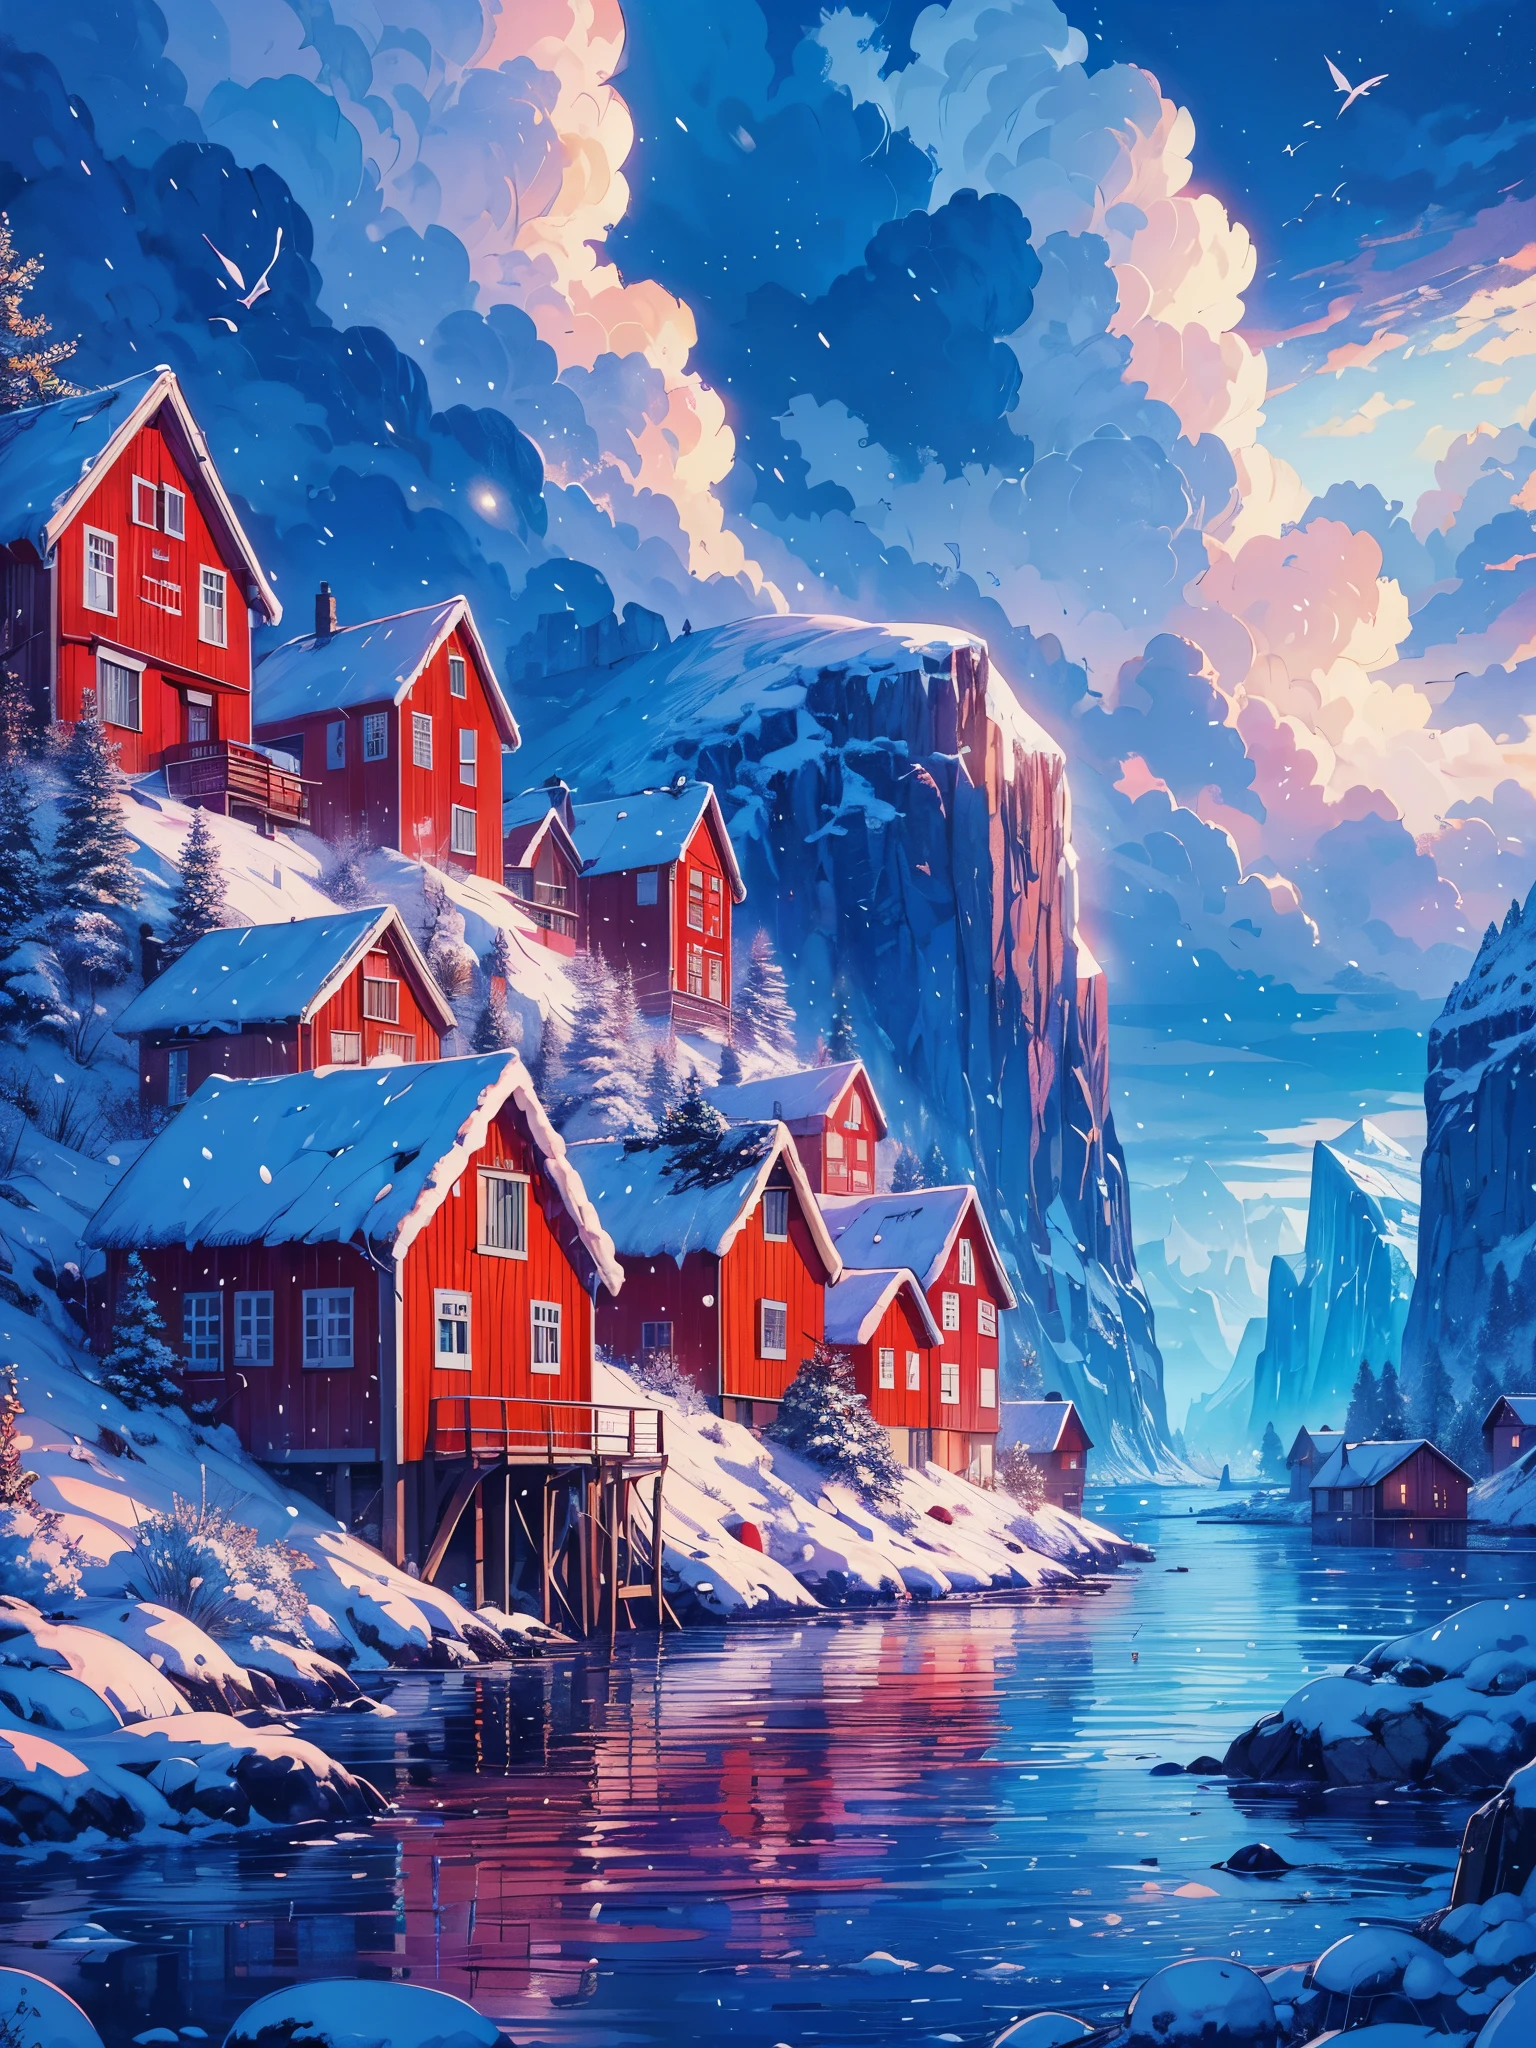 Draw an digital anime art of wide lofi scene of red houses in norway island near lake with iceberg, snowfall, evening time, blue hour, beautiful cloudy sky, vibrant color tones, masterpiece, peaceful scene